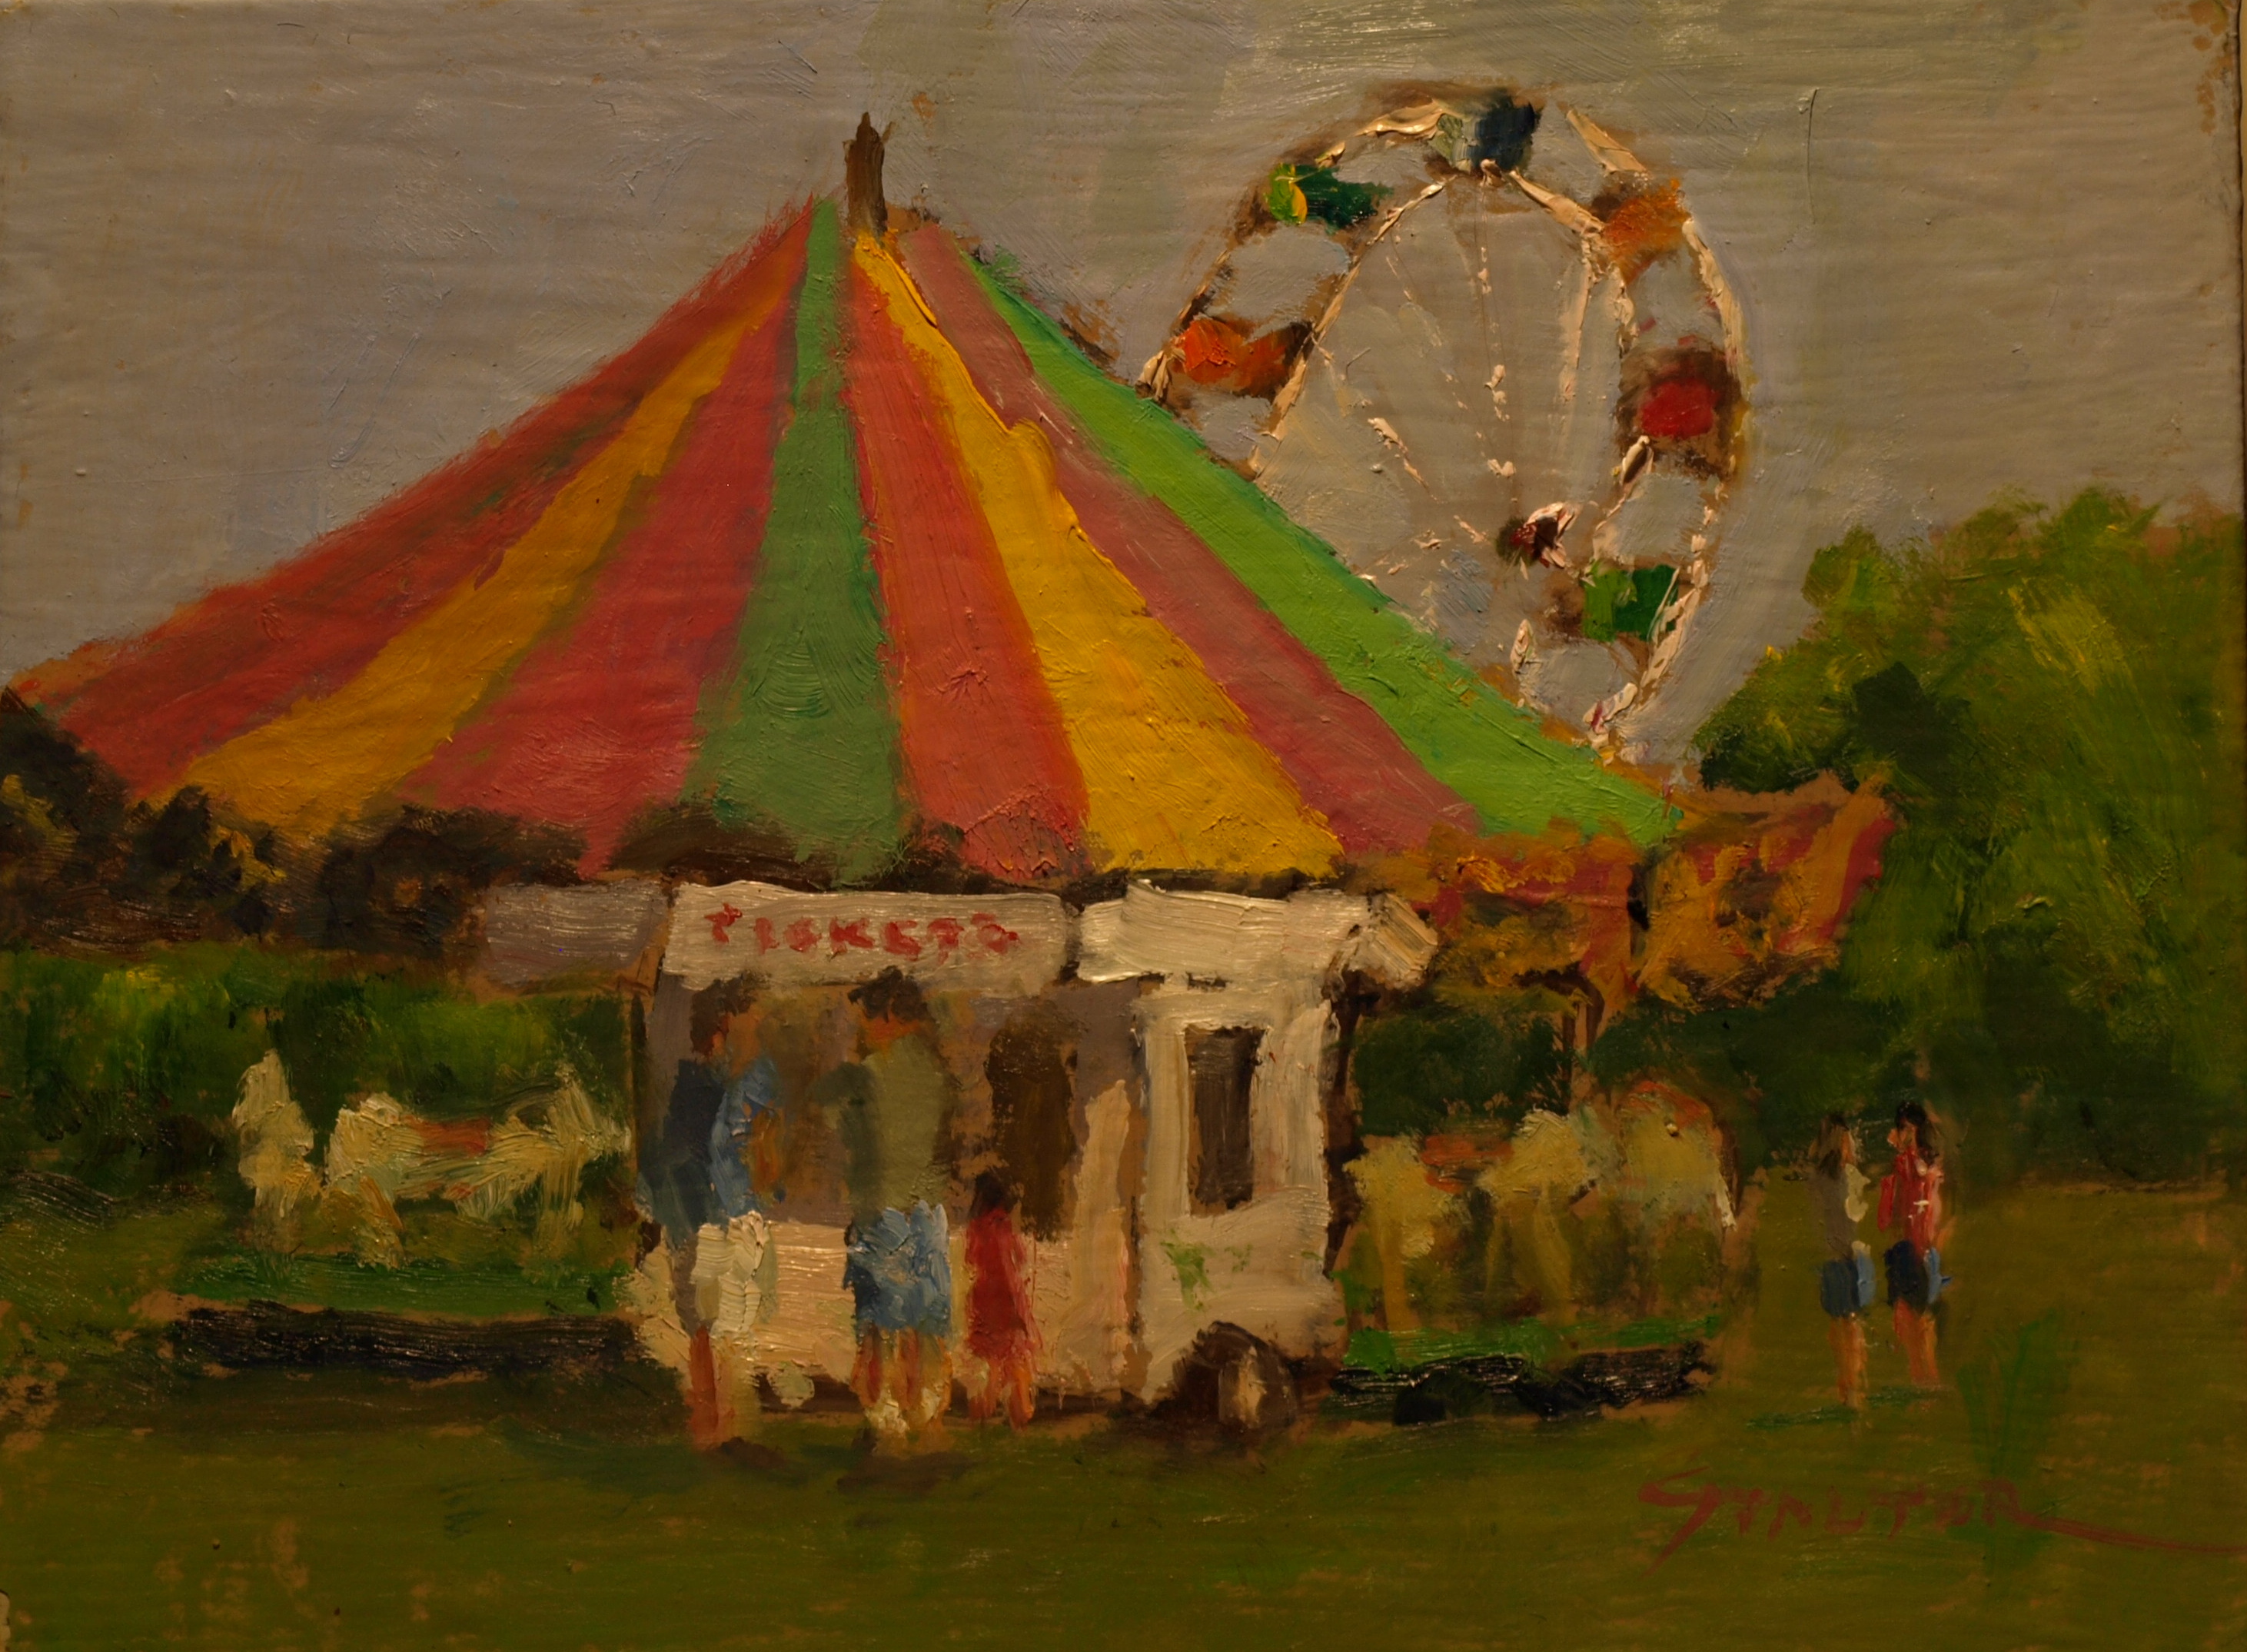 Carnival Rides, Oil on Canvas on Panel, 9 x 12 Inches, by Richard Stalter, $220